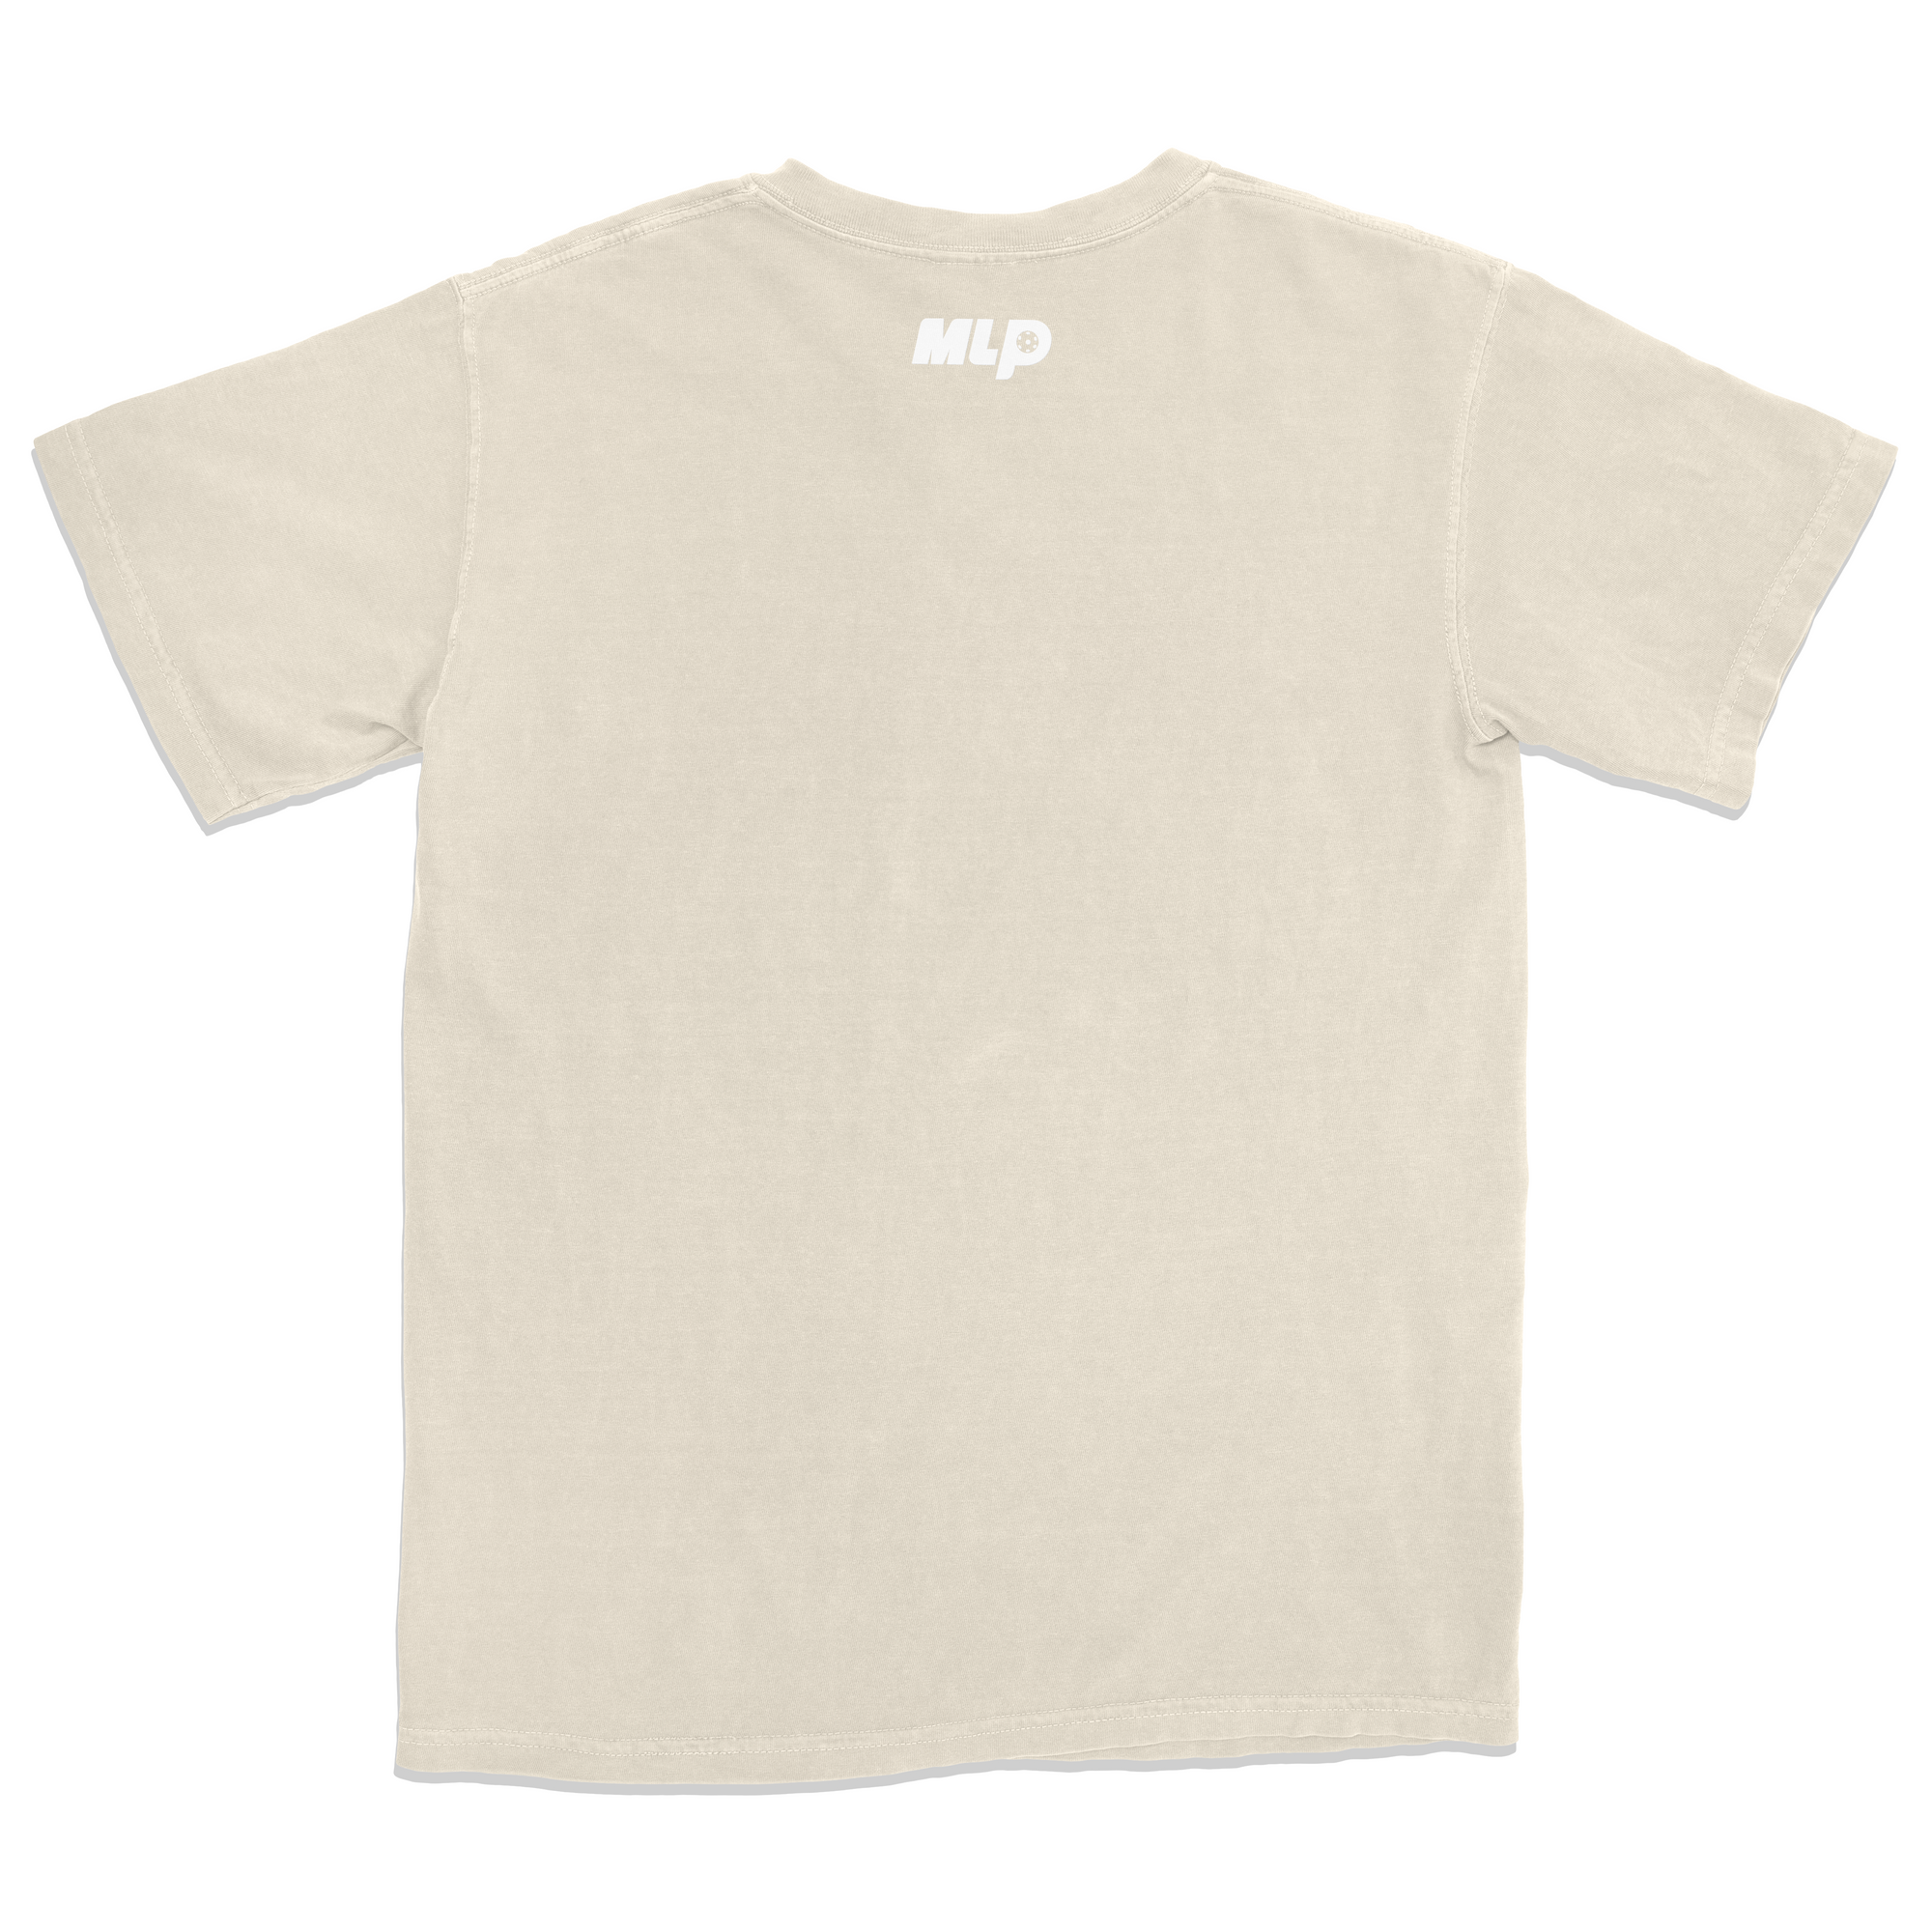 Orlando Squeeze Lil Squeezy Pocket Tee - Ivory